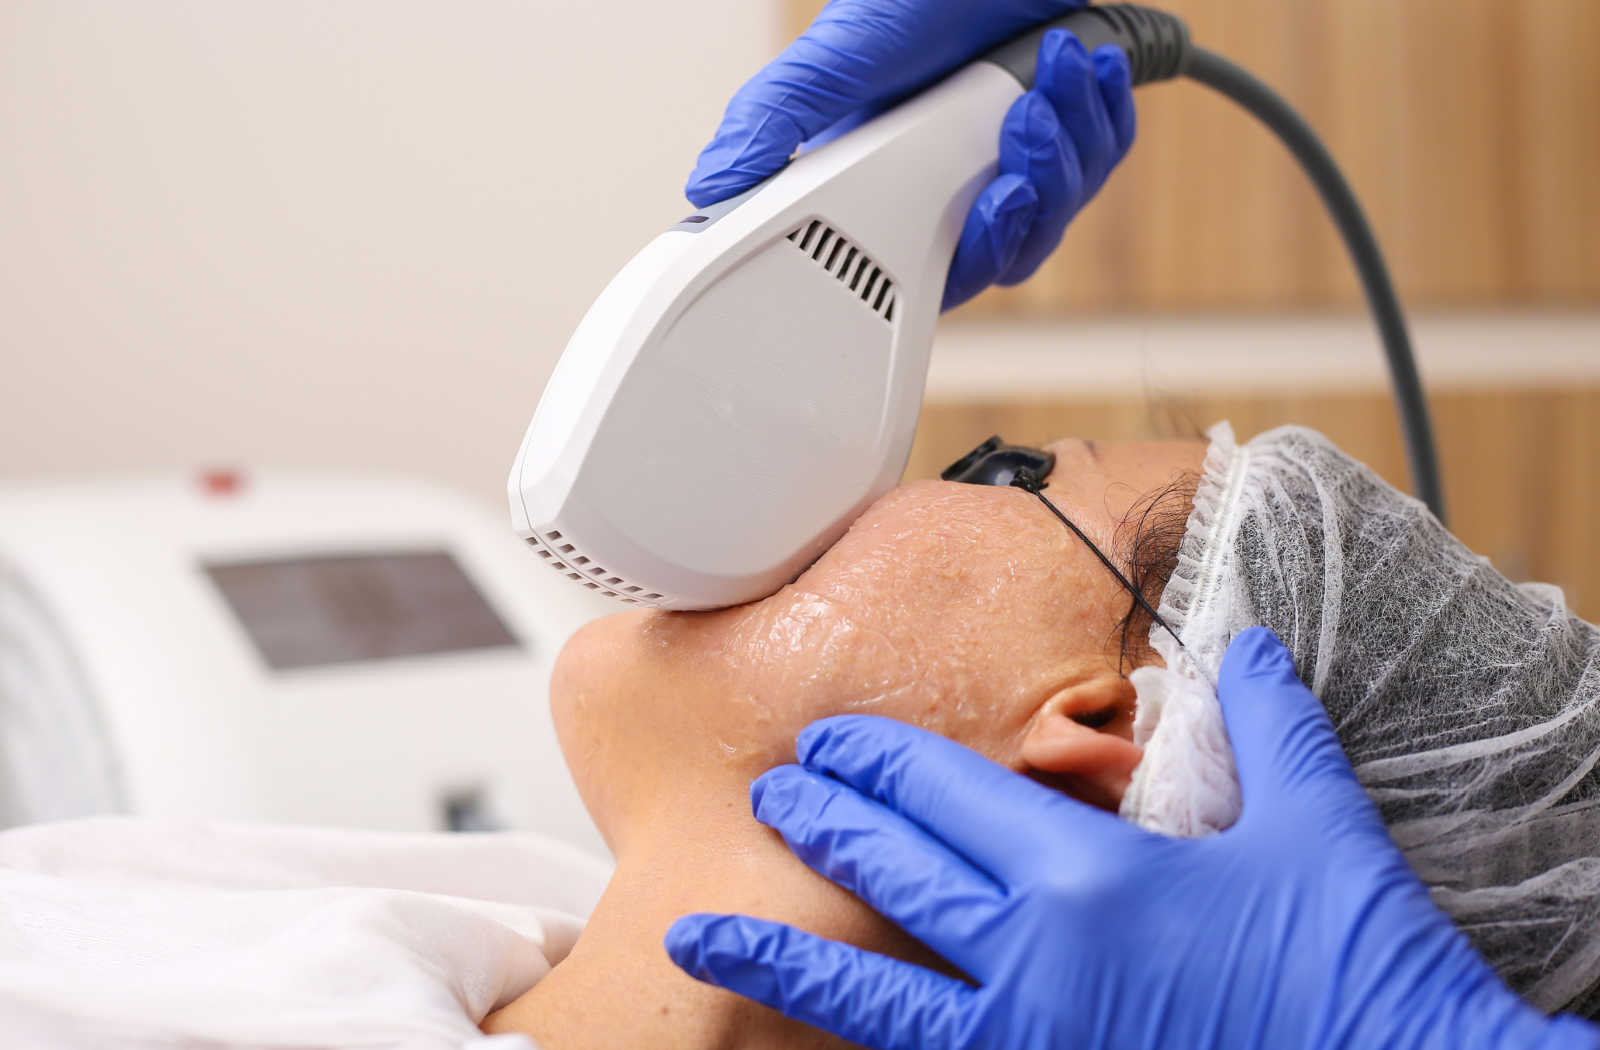 A woman at the clinic has an IPL device used on her face.